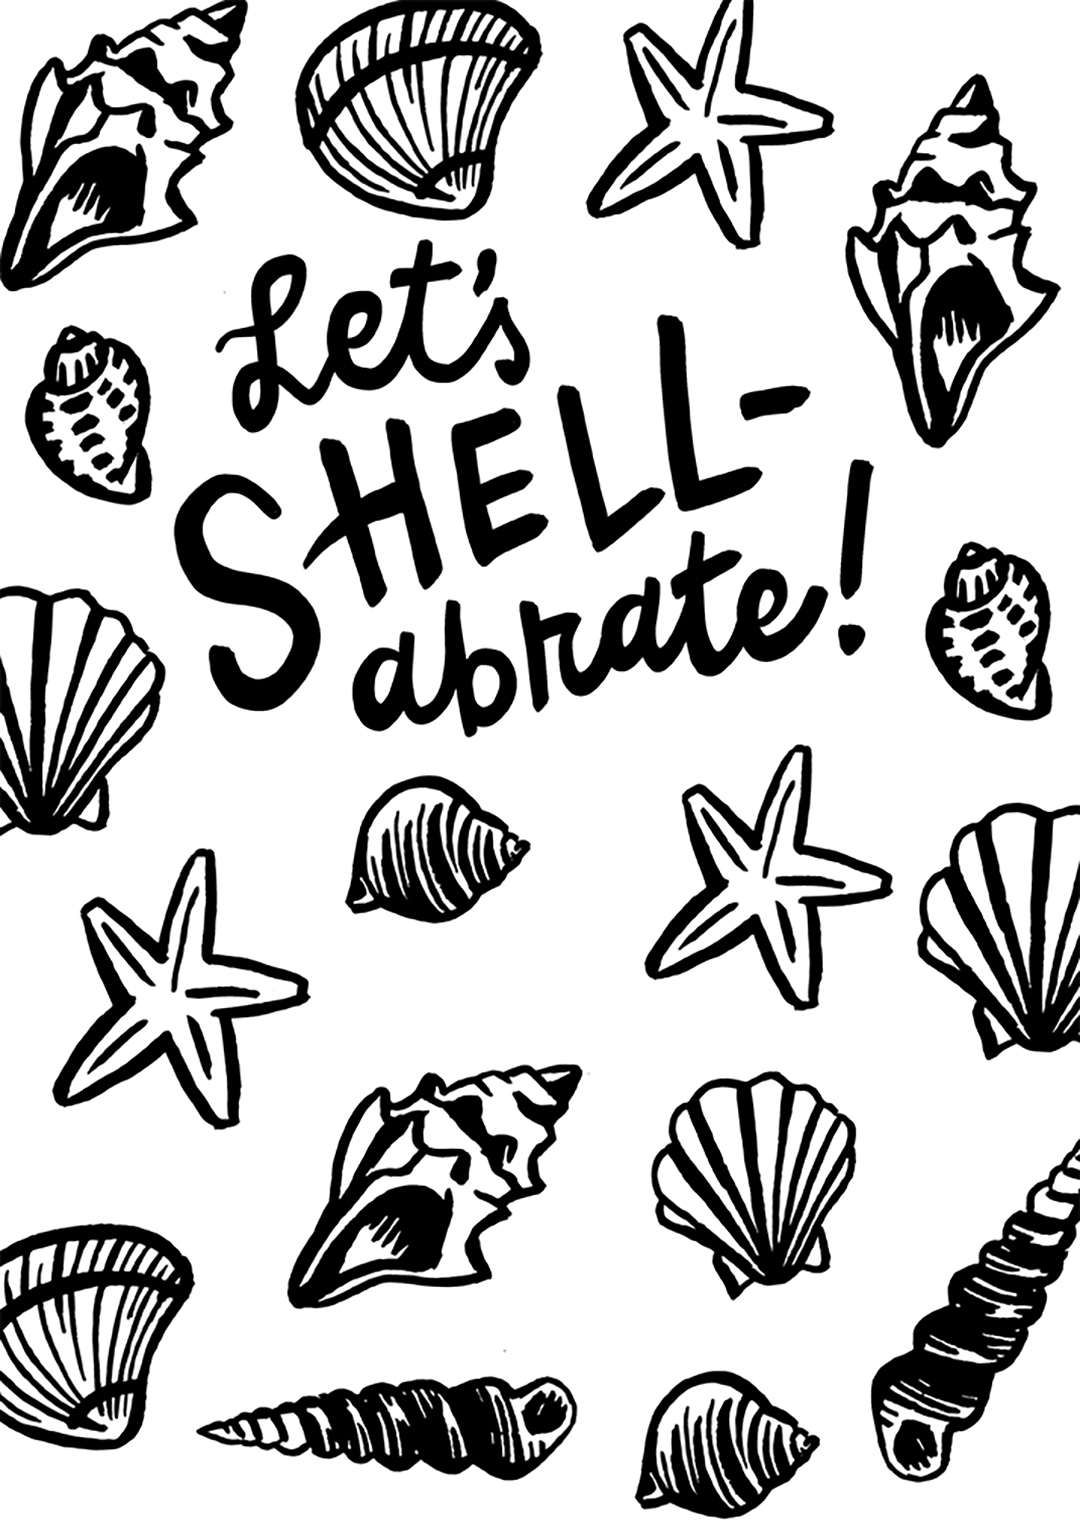 Let's Shell-abrate!